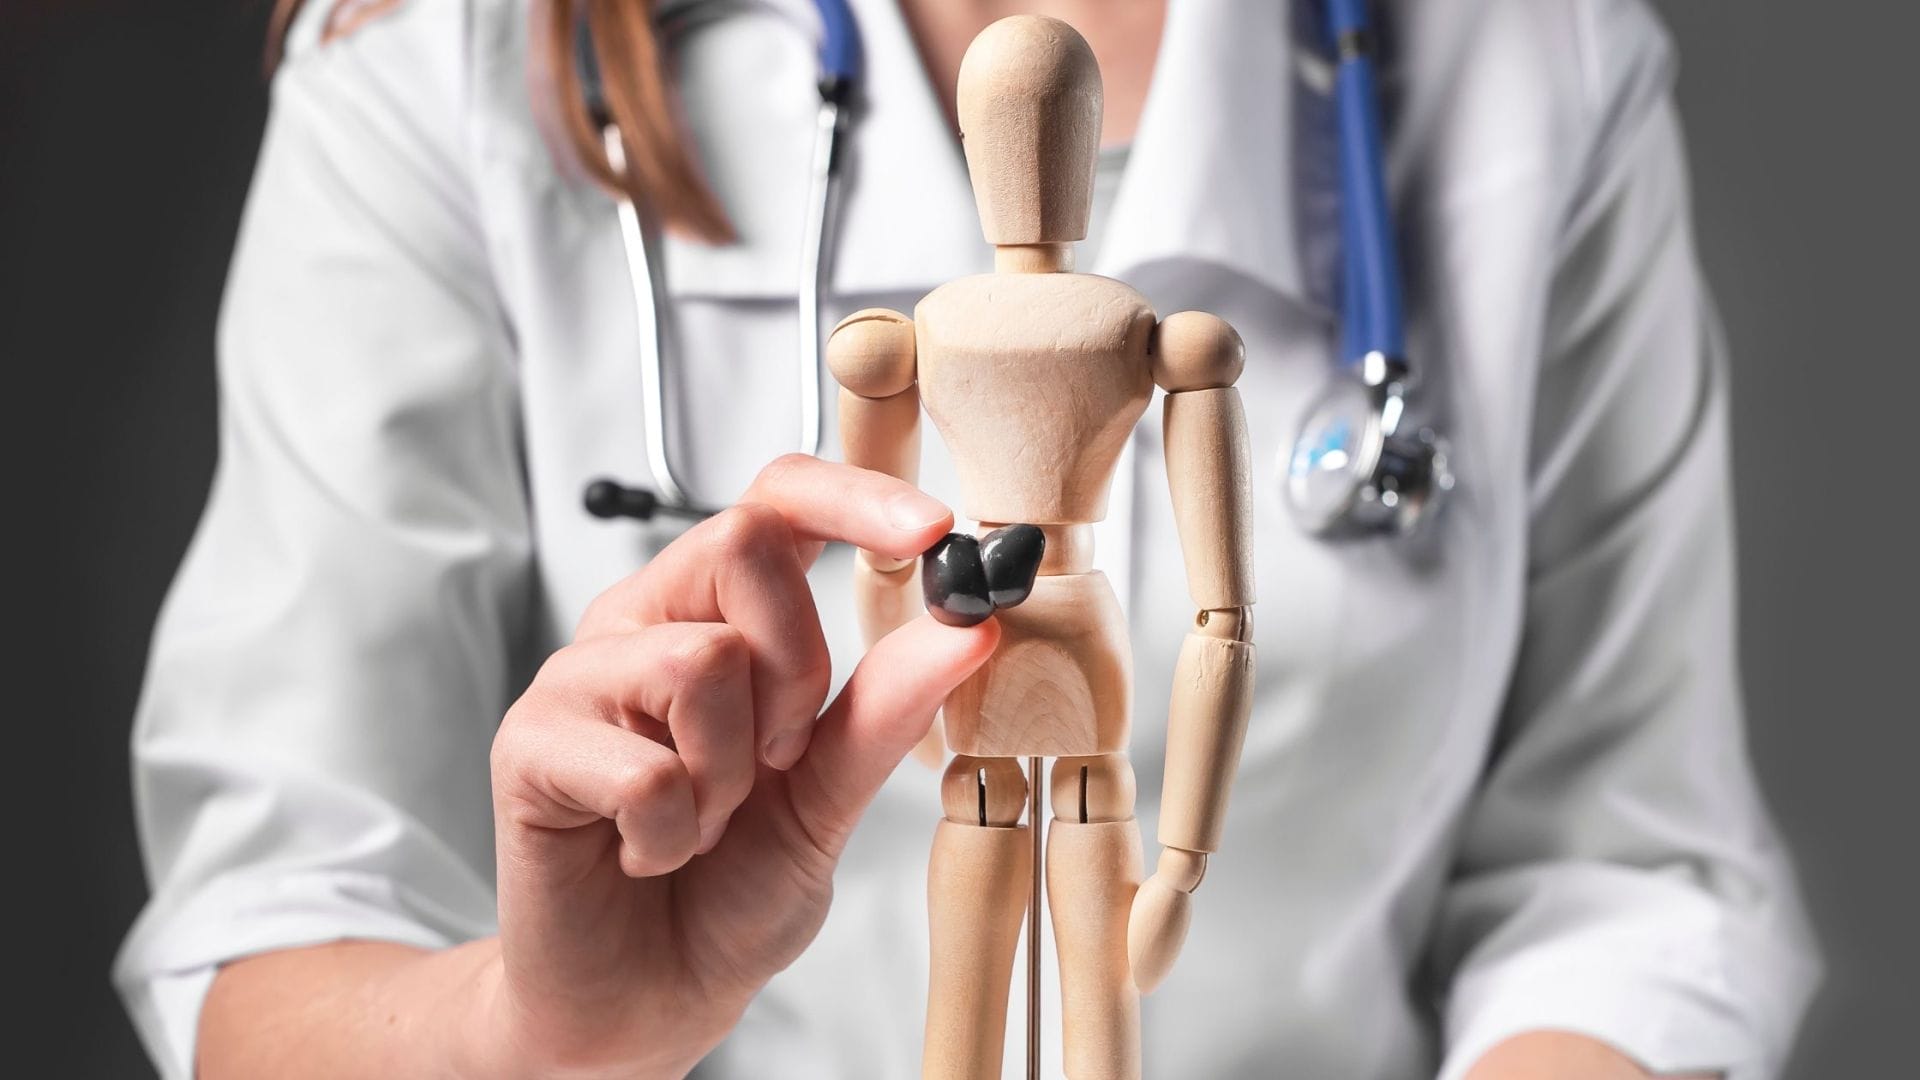 A medical professional holding an anatomical wooden mannequin with a black spot on its upper right abdomen, representing a liver, to discuss tips for managing liver cancer treatment costs.